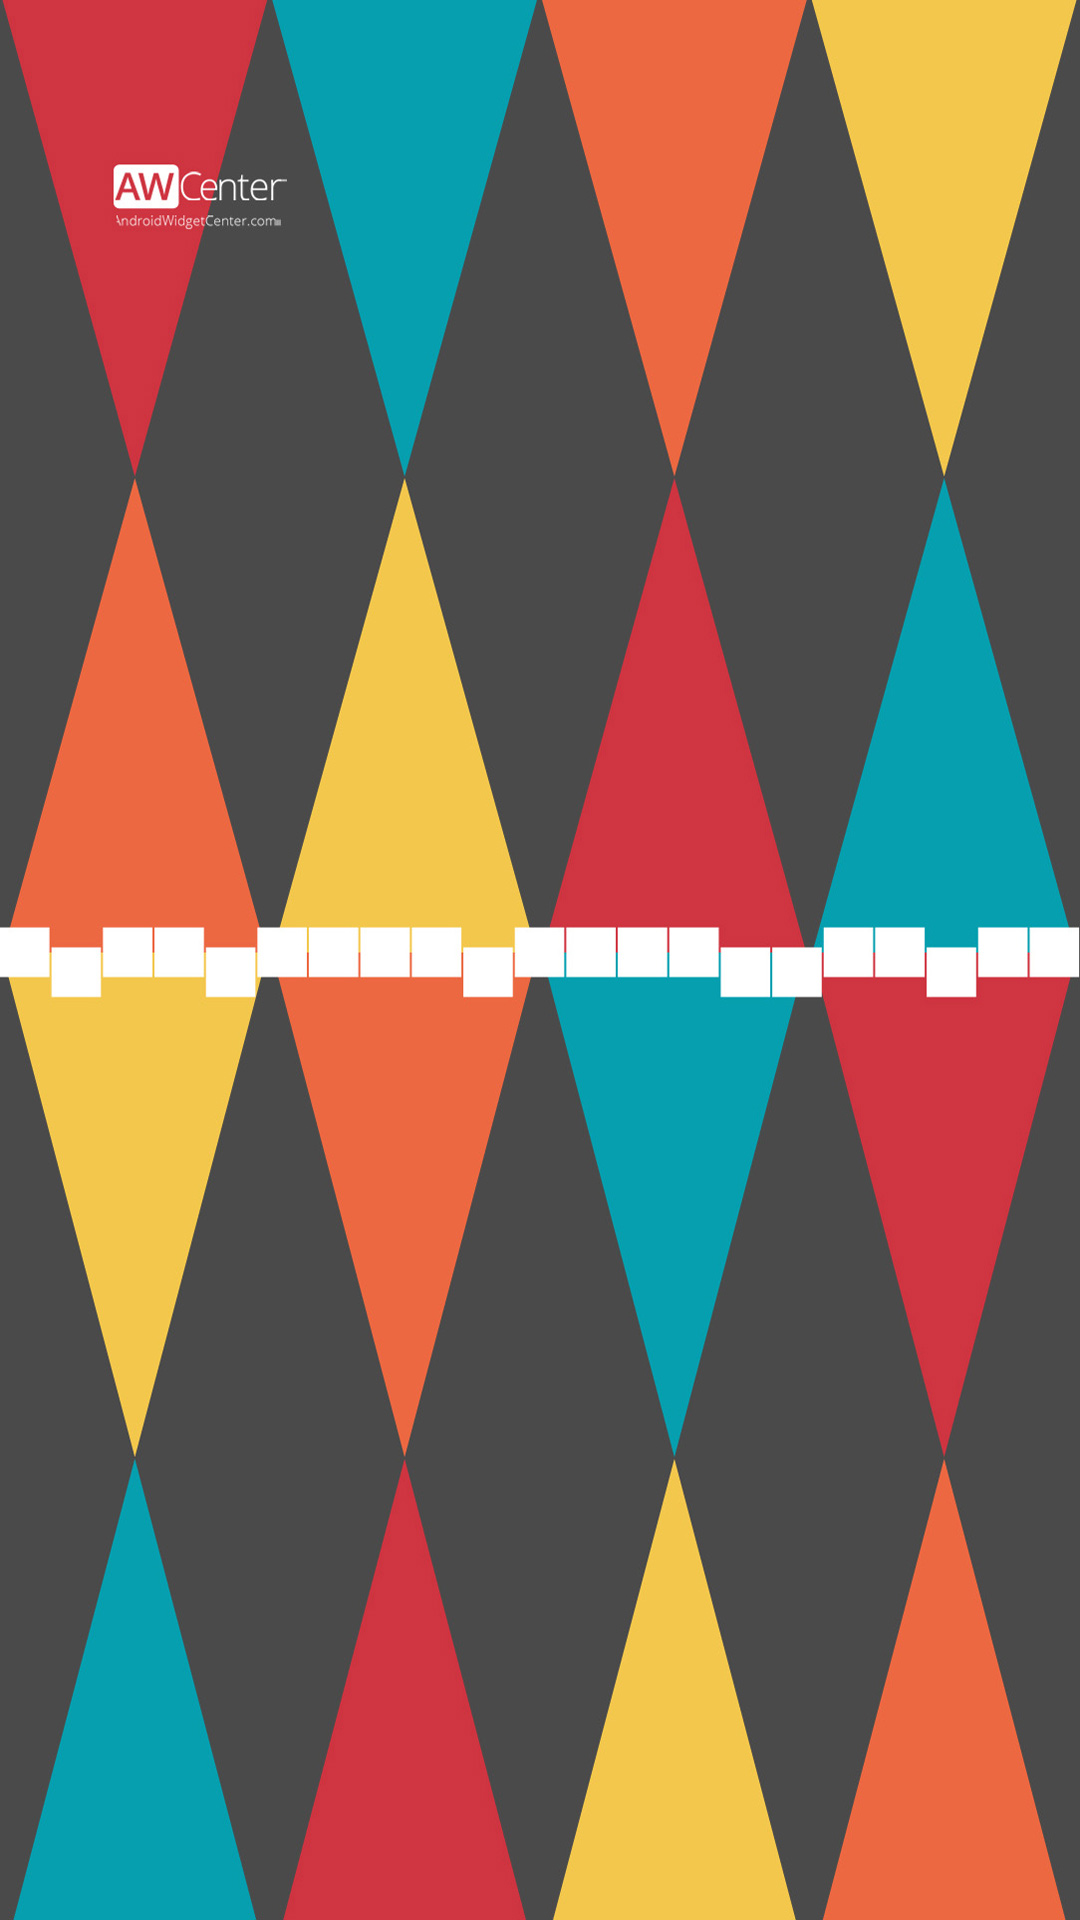 piano wallpaper for android,orange,pattern,blue,triangle,yellow